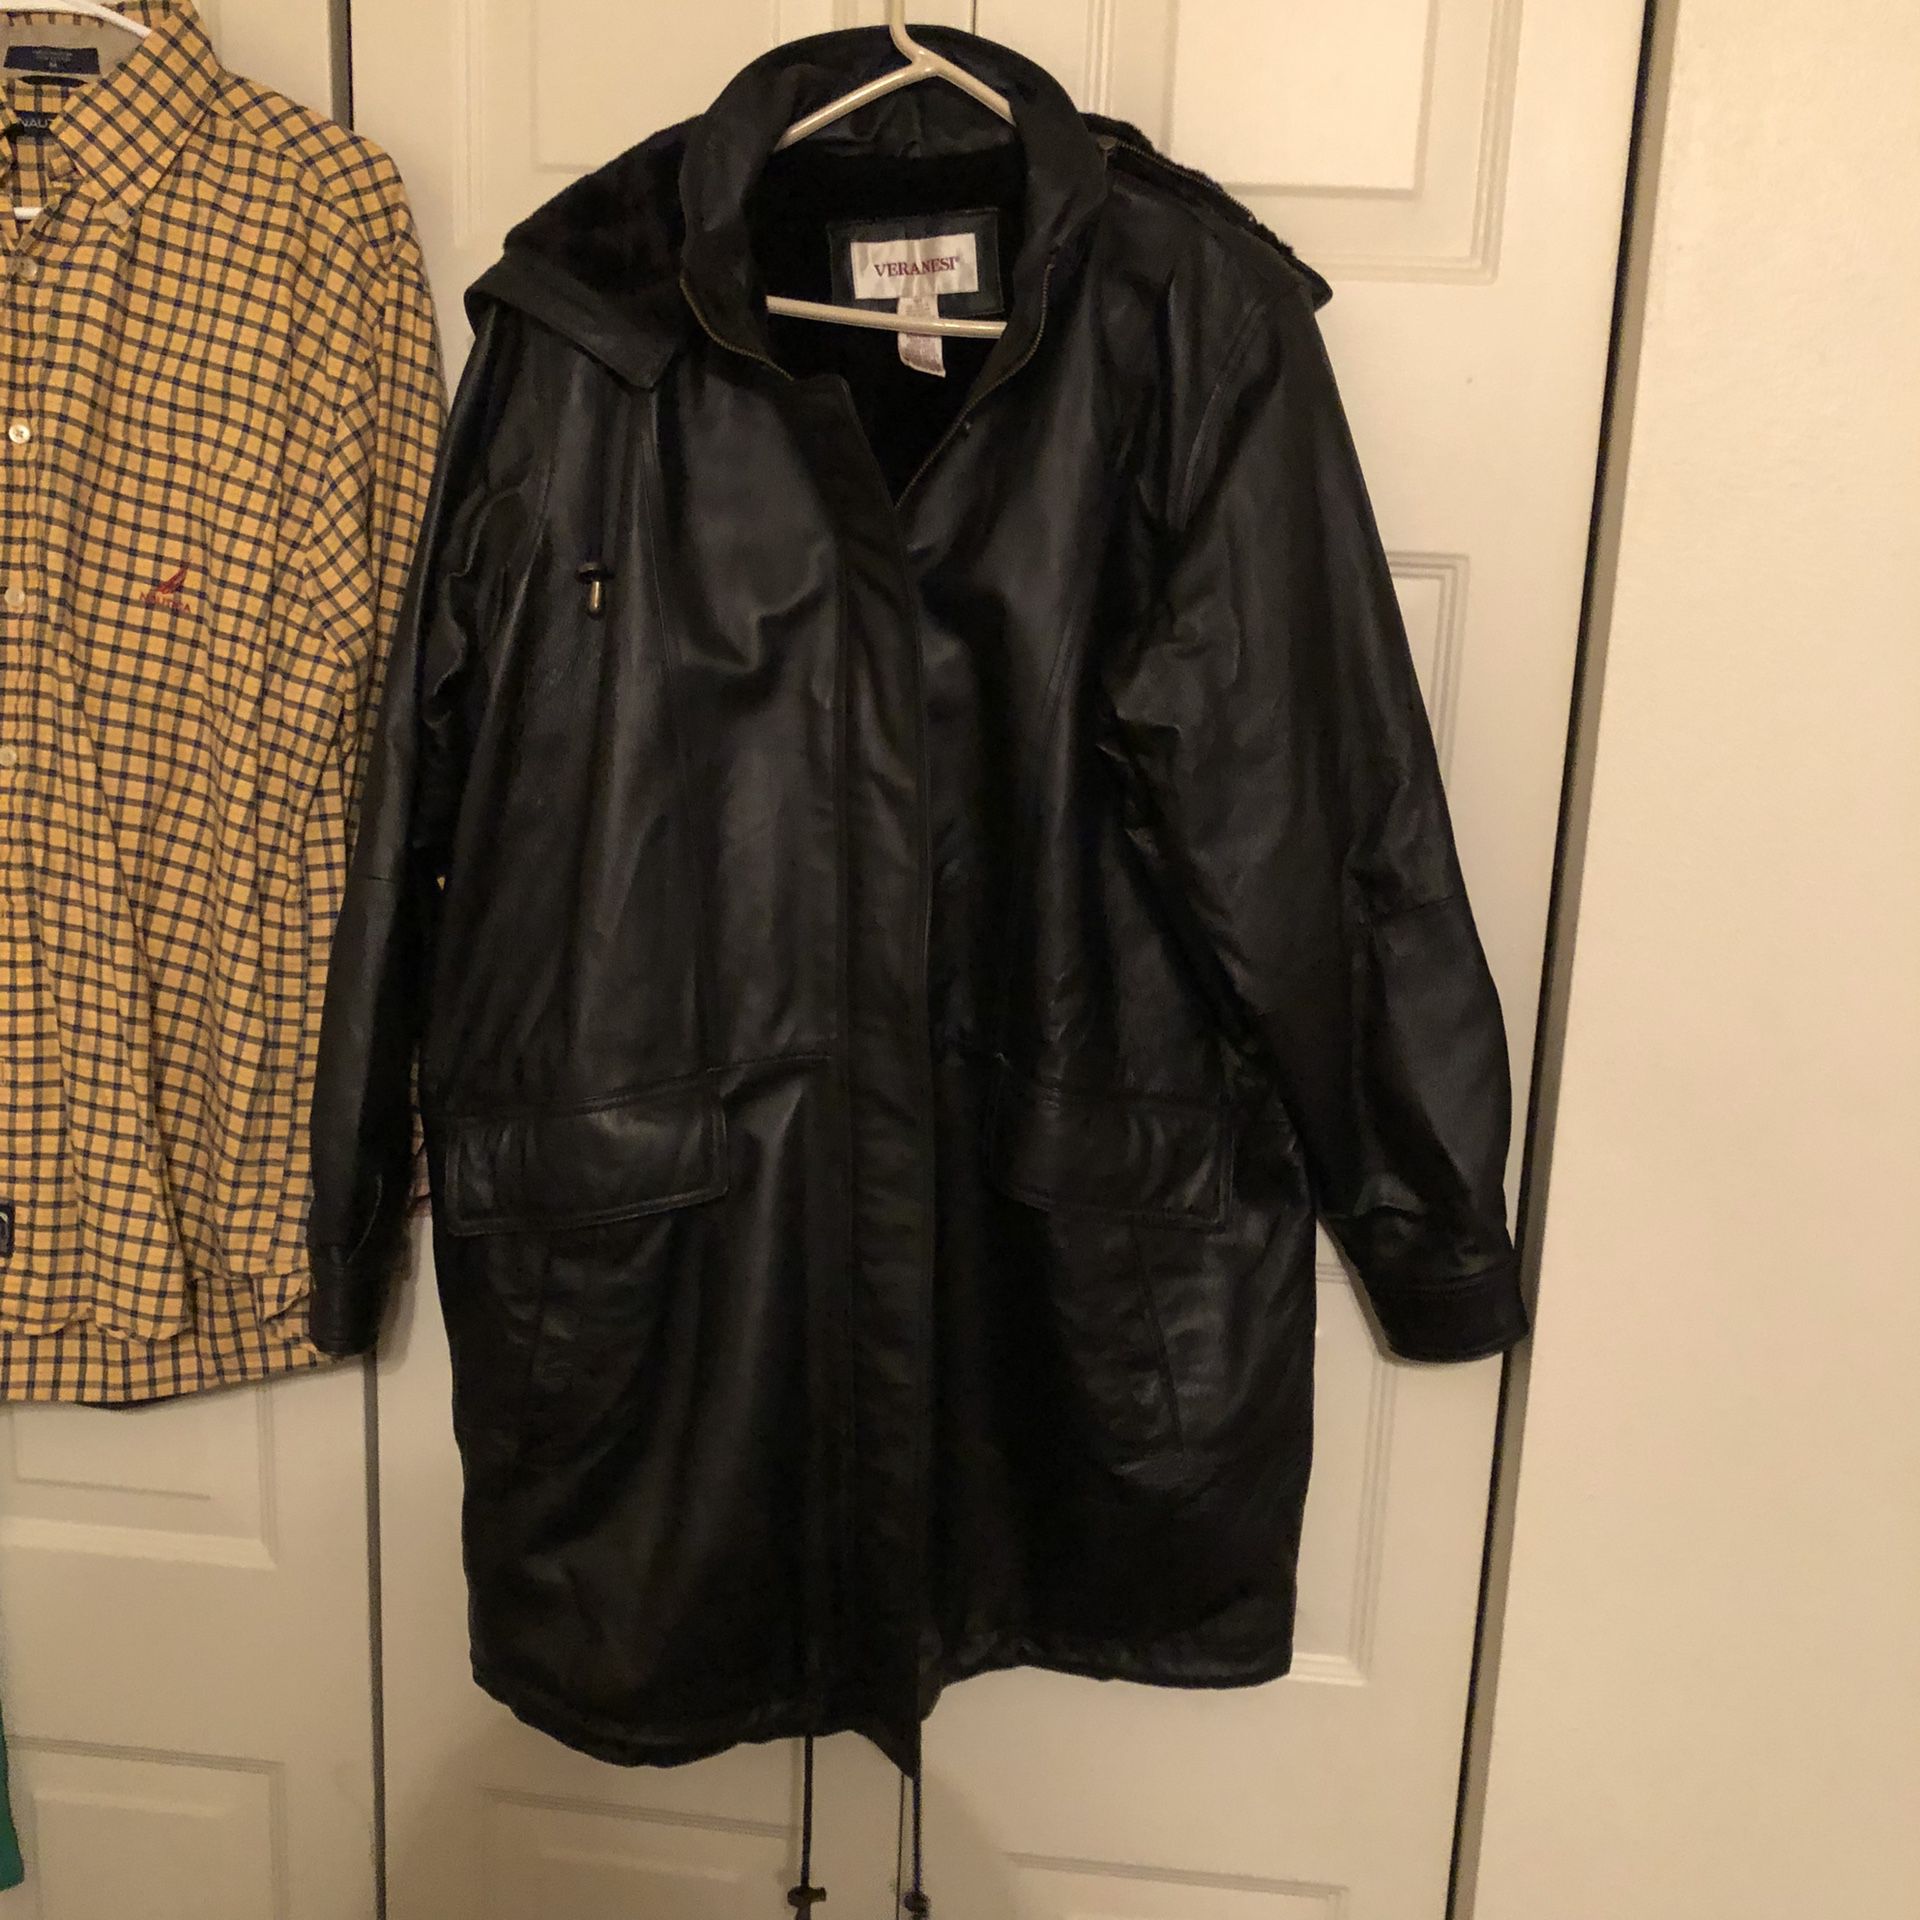 Ladies’ black, leather coat-w/removable hood, zipper, inside pockets size XL-$50 Men’s black leather coat, zip up-$40 Men’s shirts-$3 each or all for 